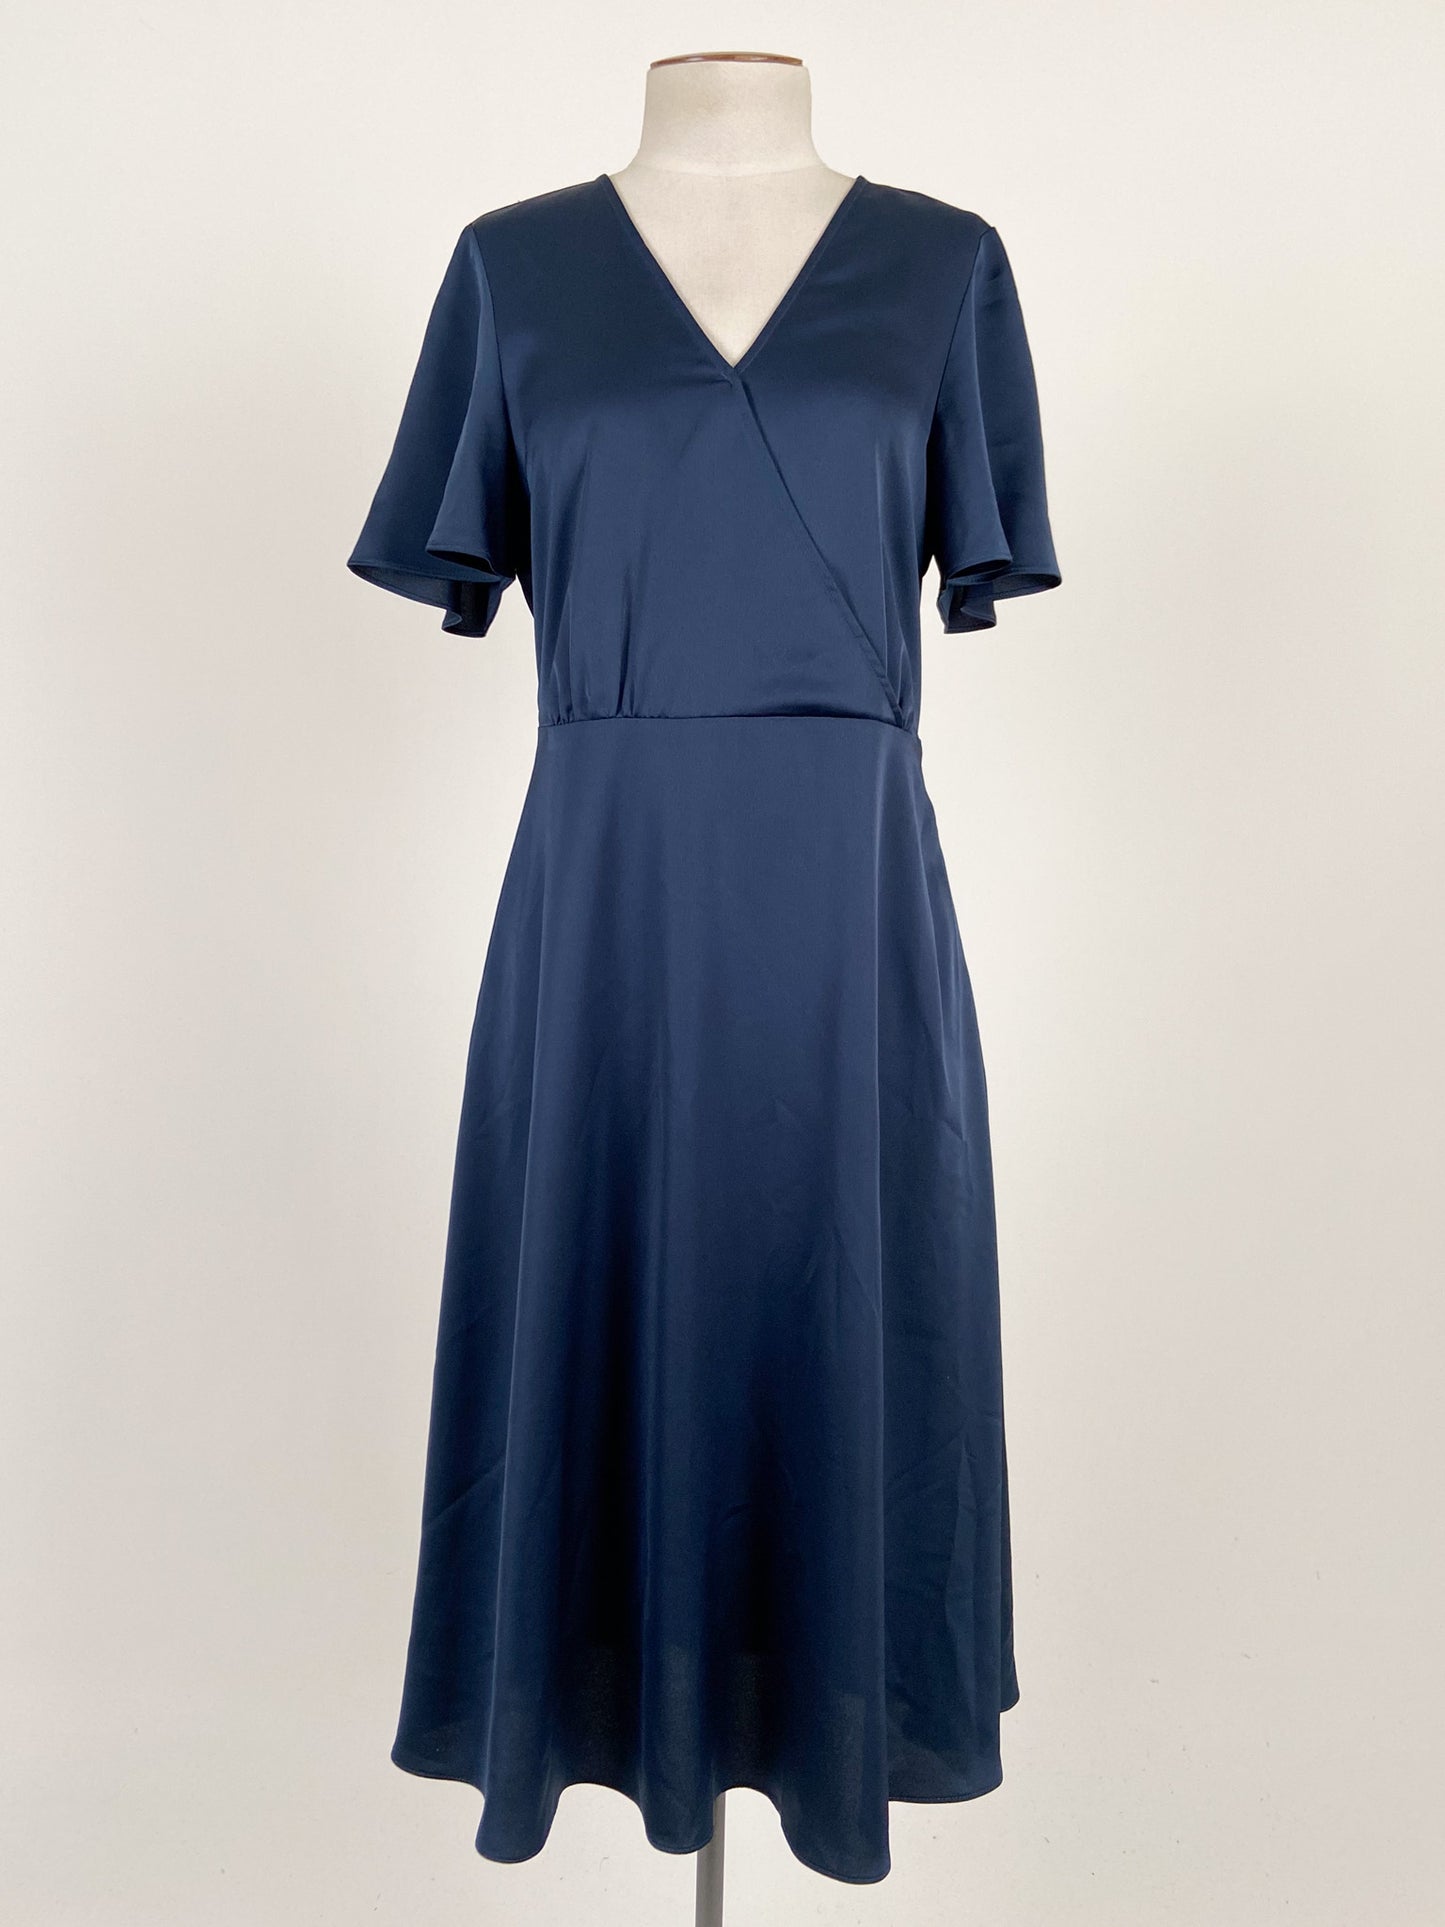 H&M | Navy Casual Dress | Size 8